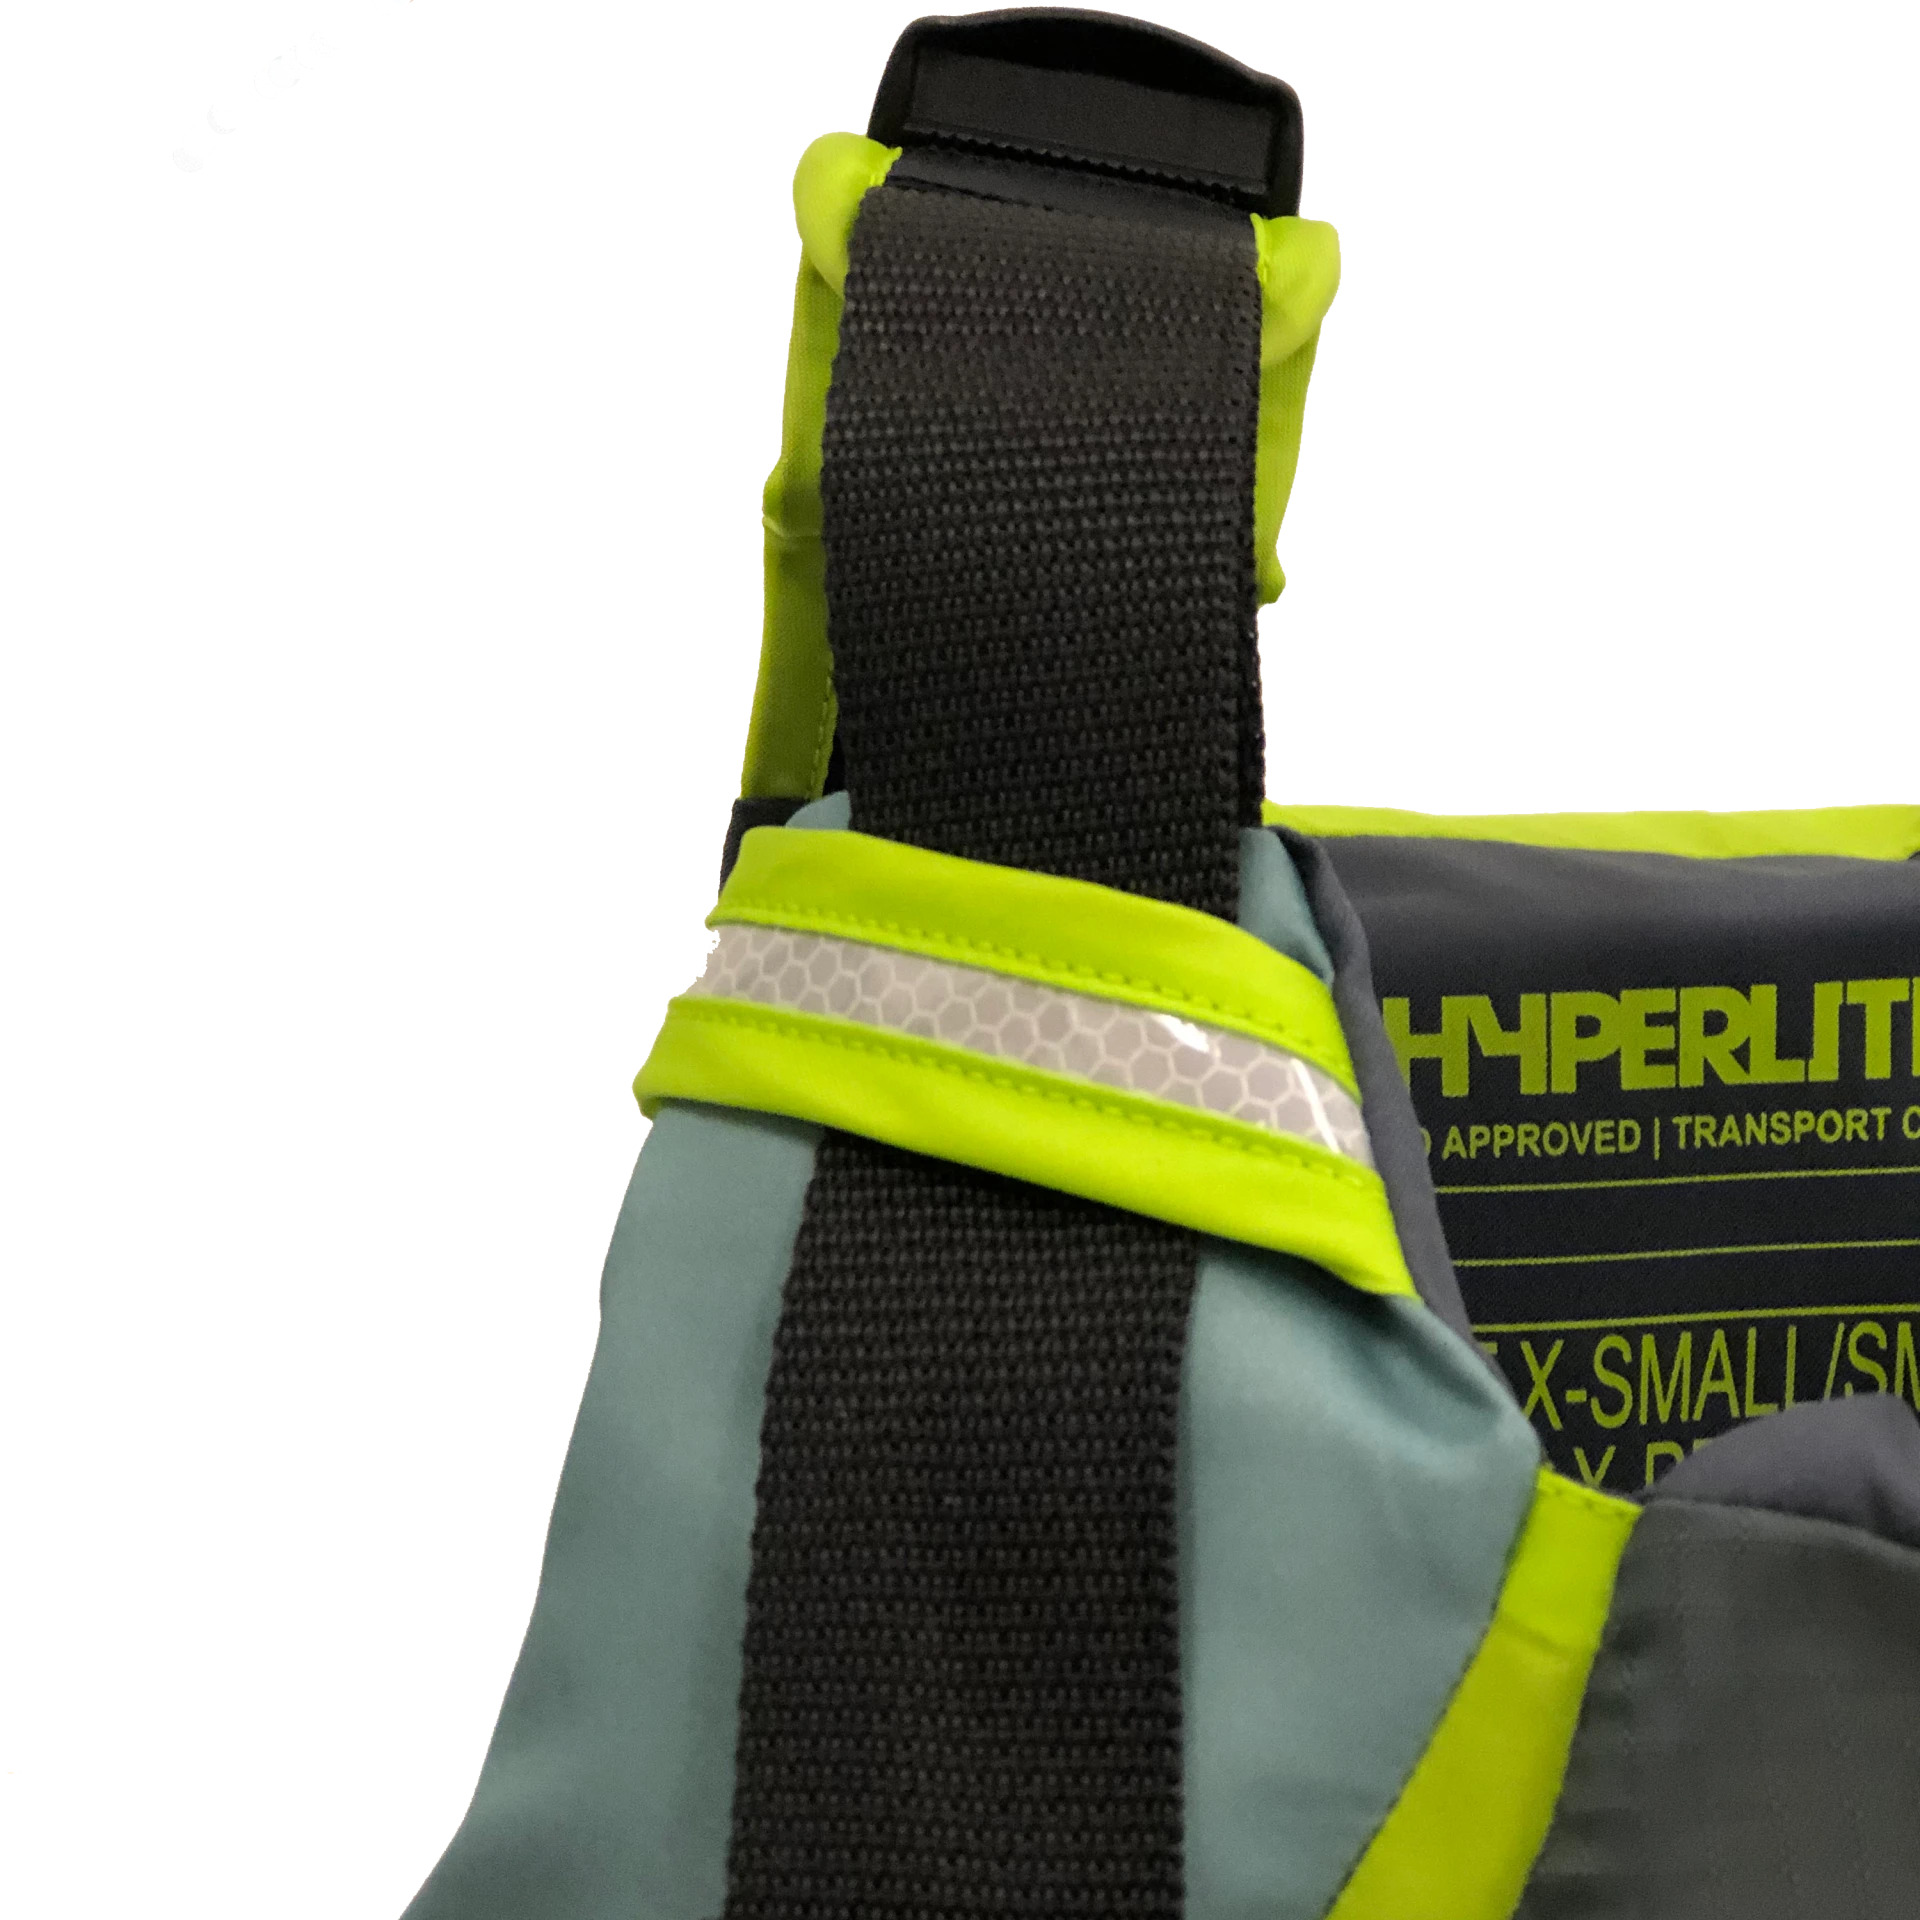 Medium/ Large Details about   Hyperlite Paddle Life Vest Attached Safety Whistle 